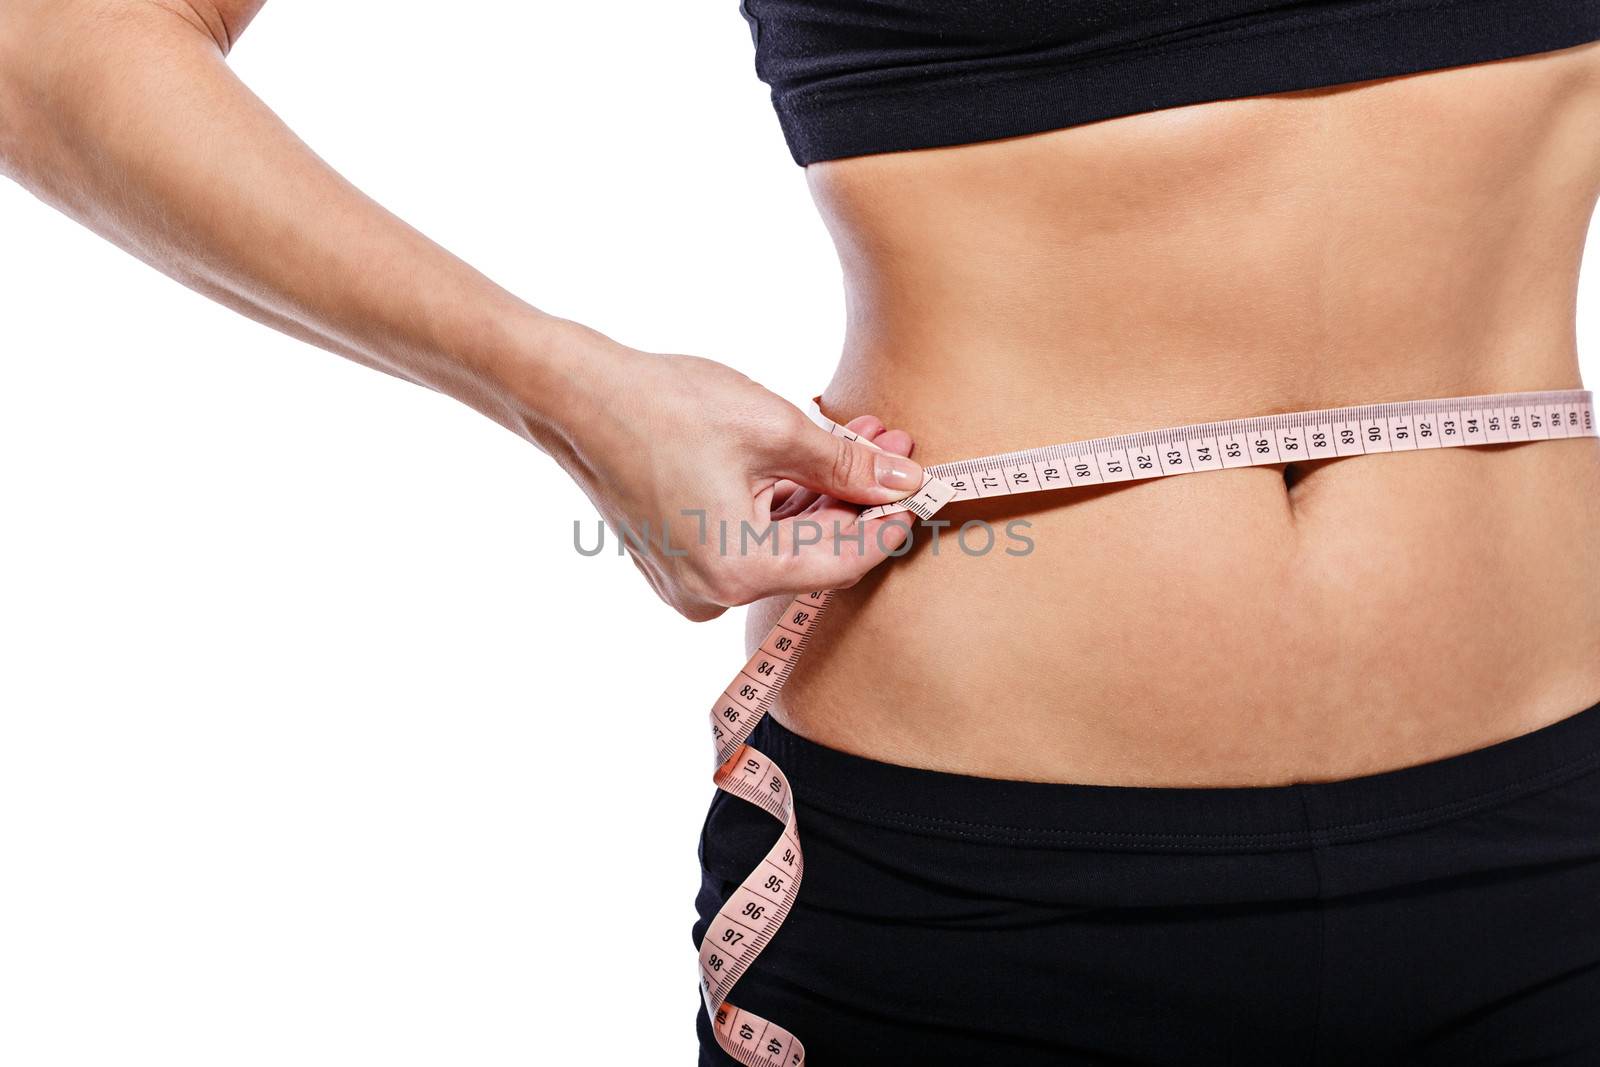 Girl measuring waist circumference after a grueling workout, isolated on white background